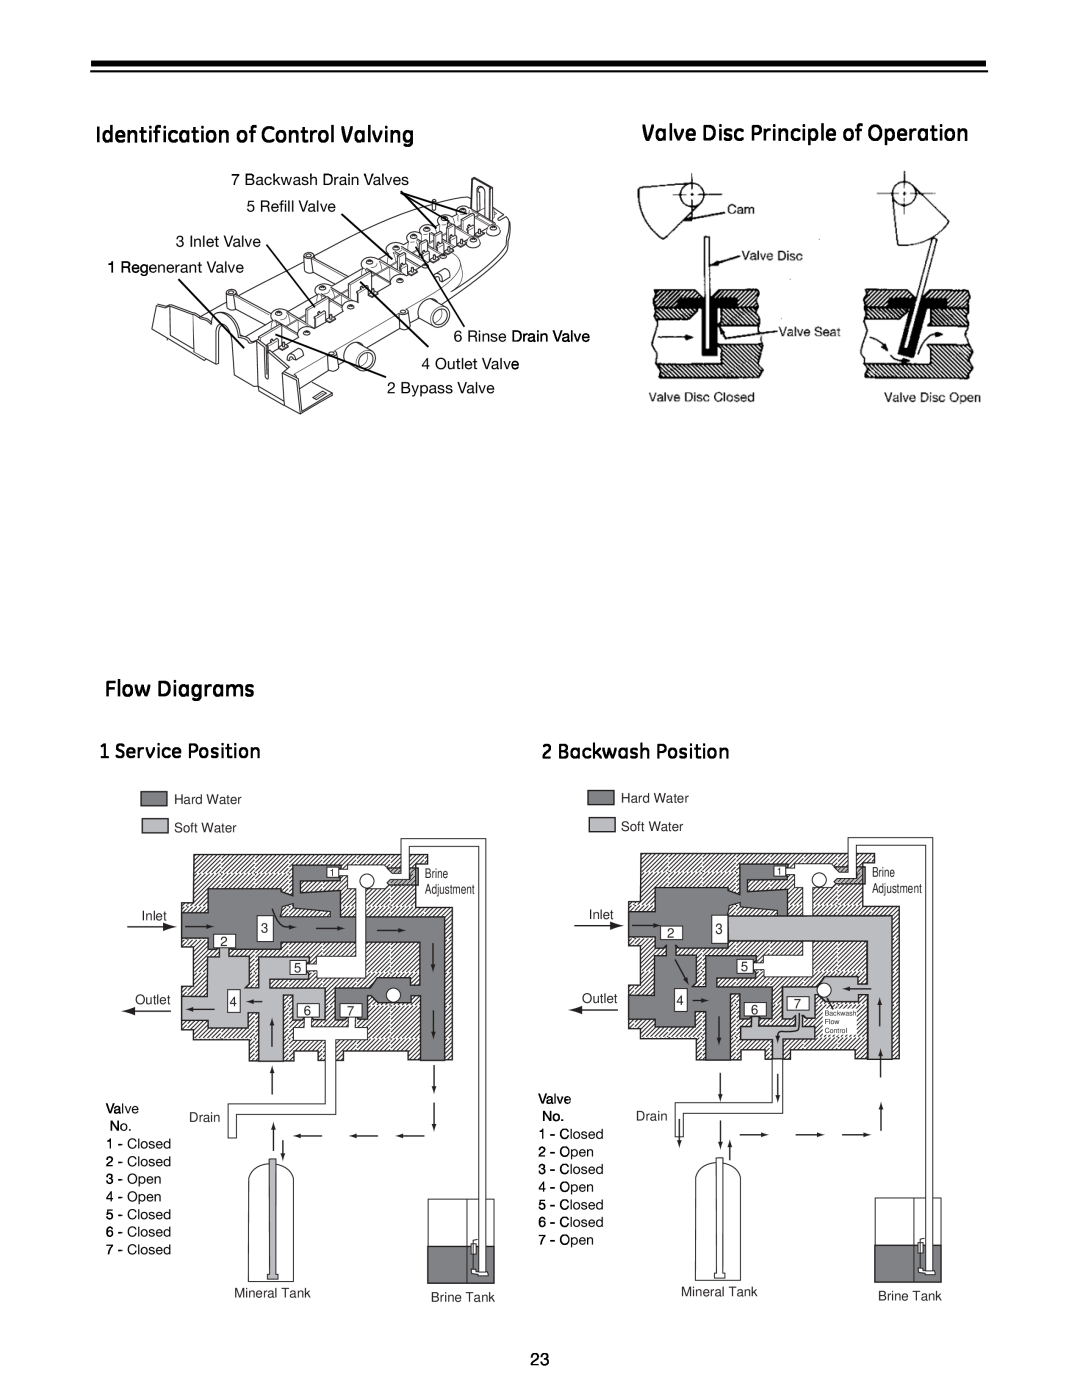 GE 960 Series manual Identification of Control Valving, Valve Disc Principle of Operation, Flow Diagrams, Service Position 